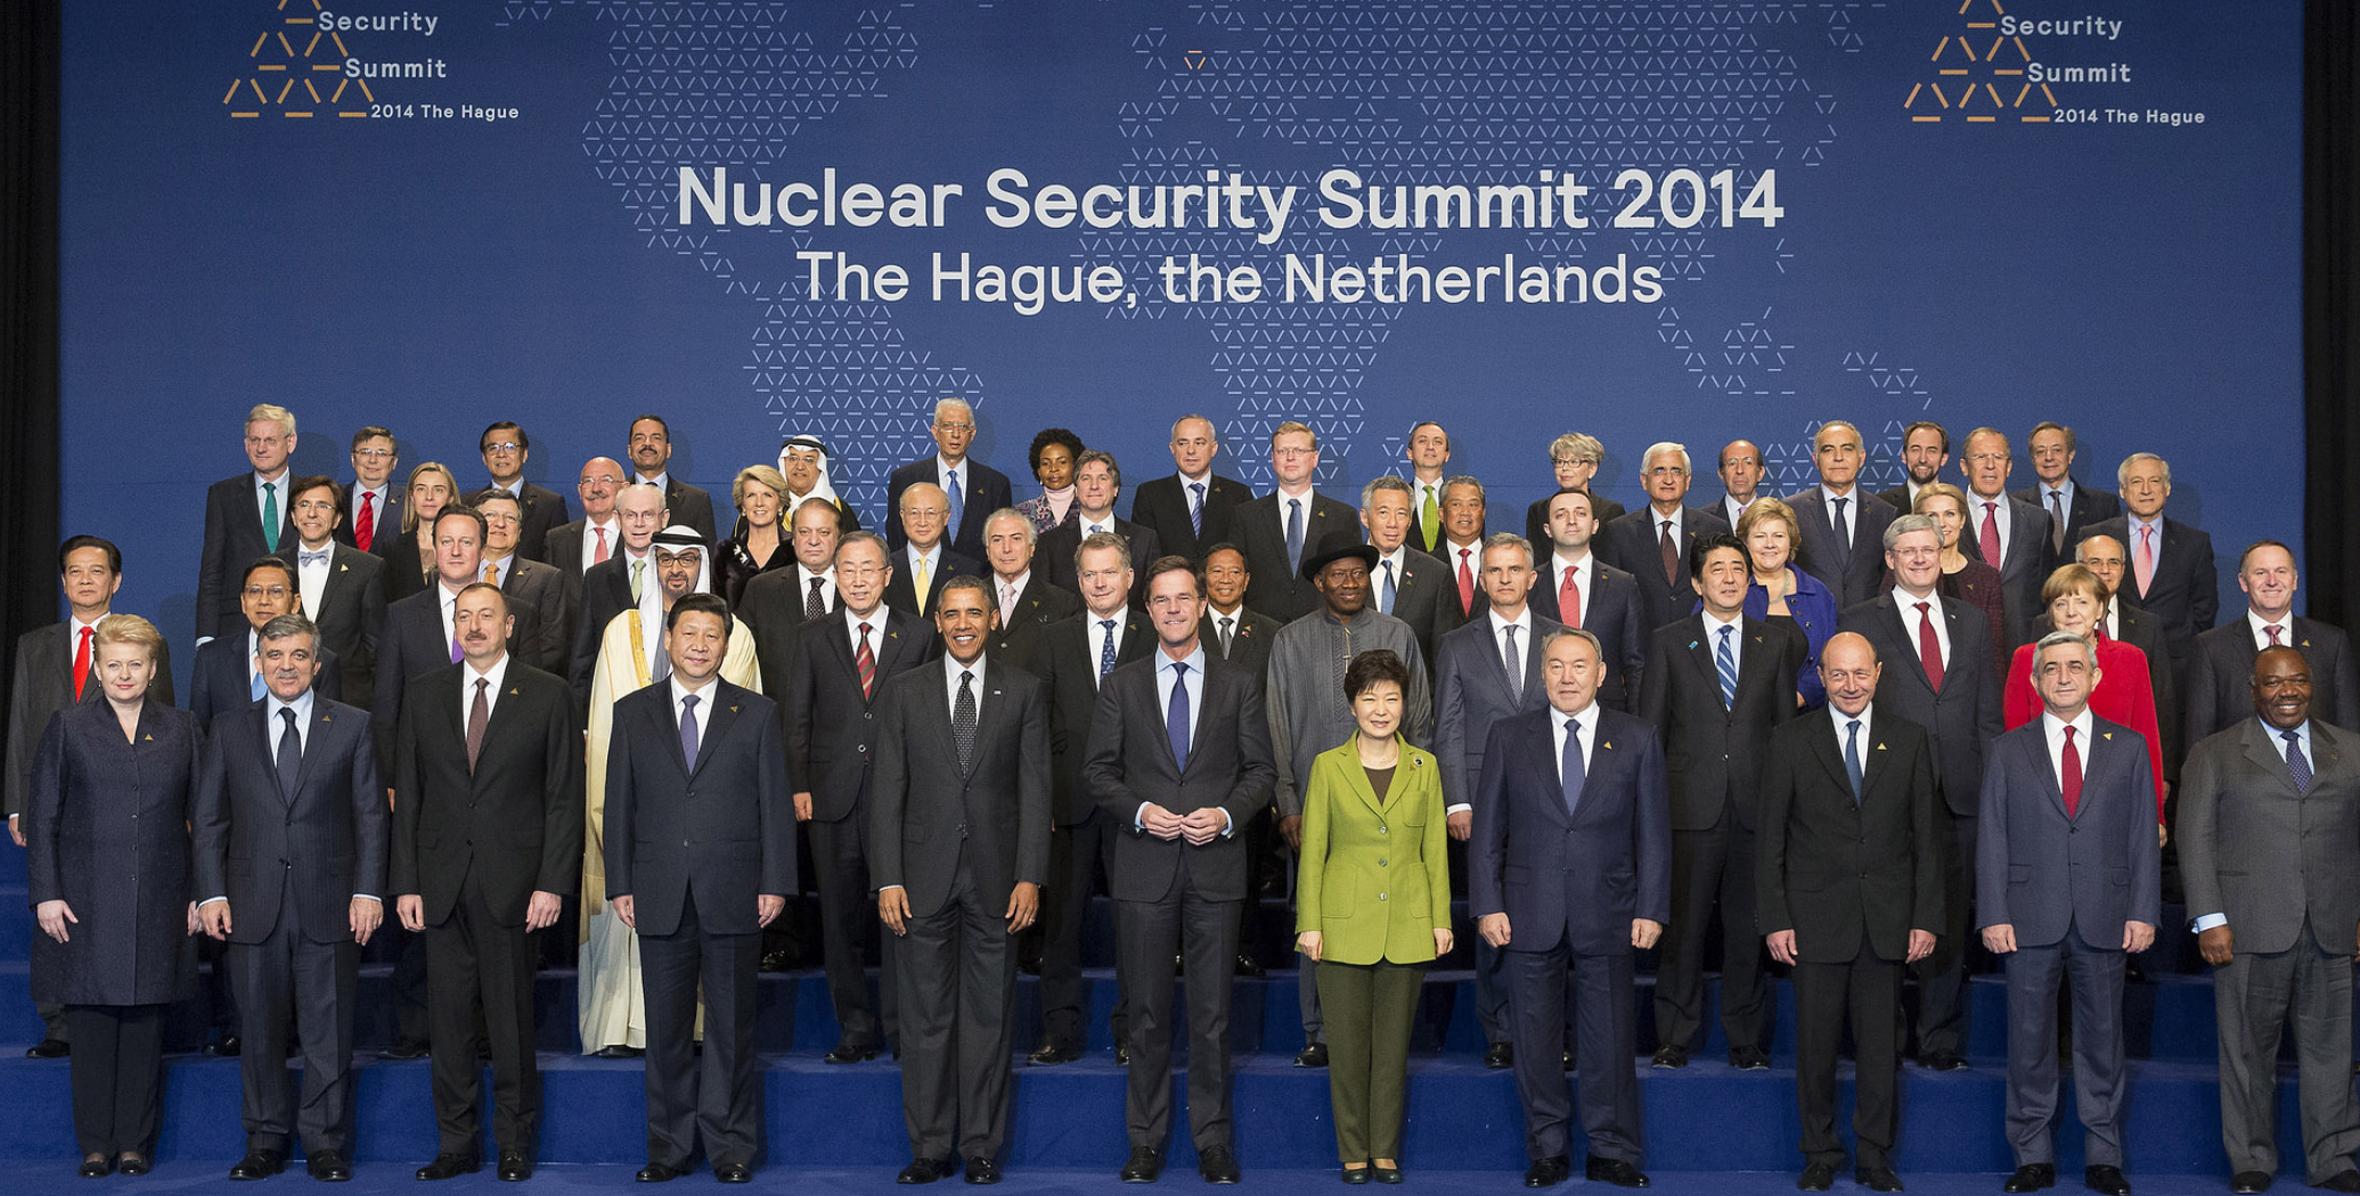 Ilham Aliyev addressed the Third Nuclear Security Summit in The Hague